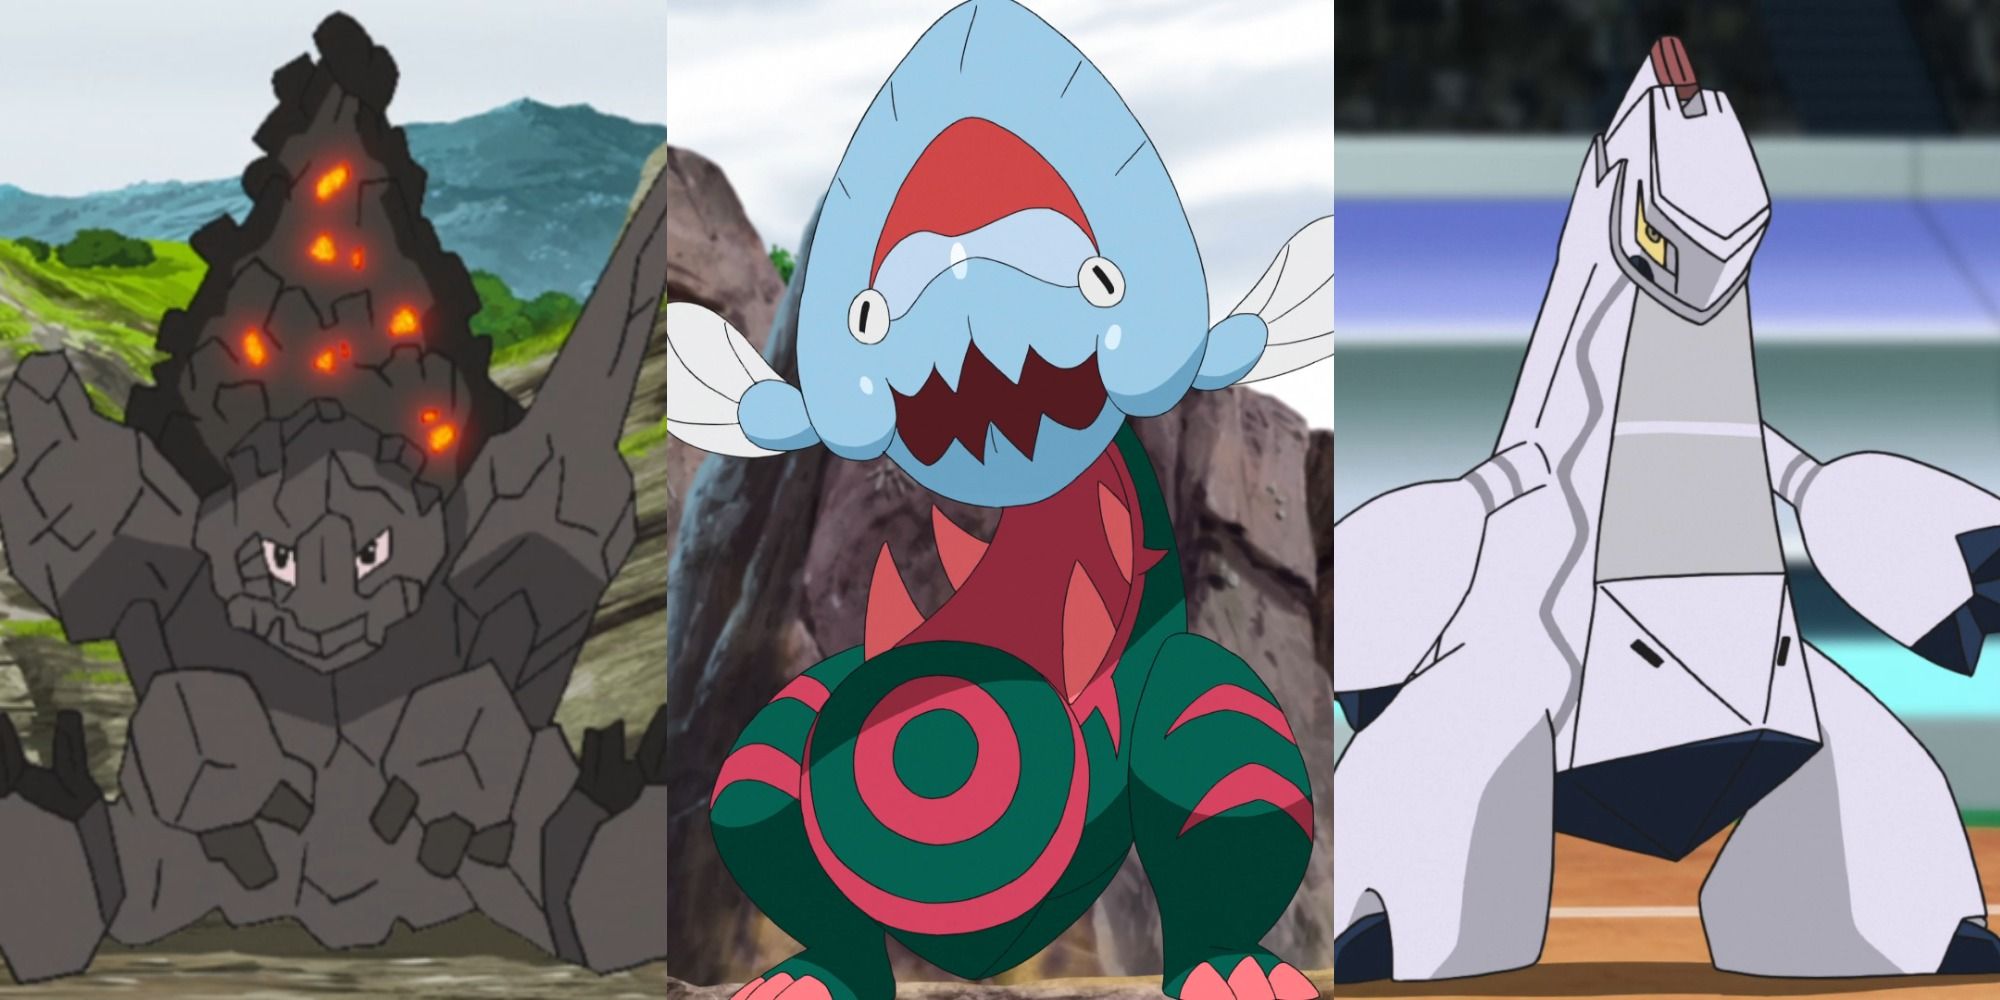 The Isle Of Armor: The 10 Strongest Pokémon To Be Added Back Into